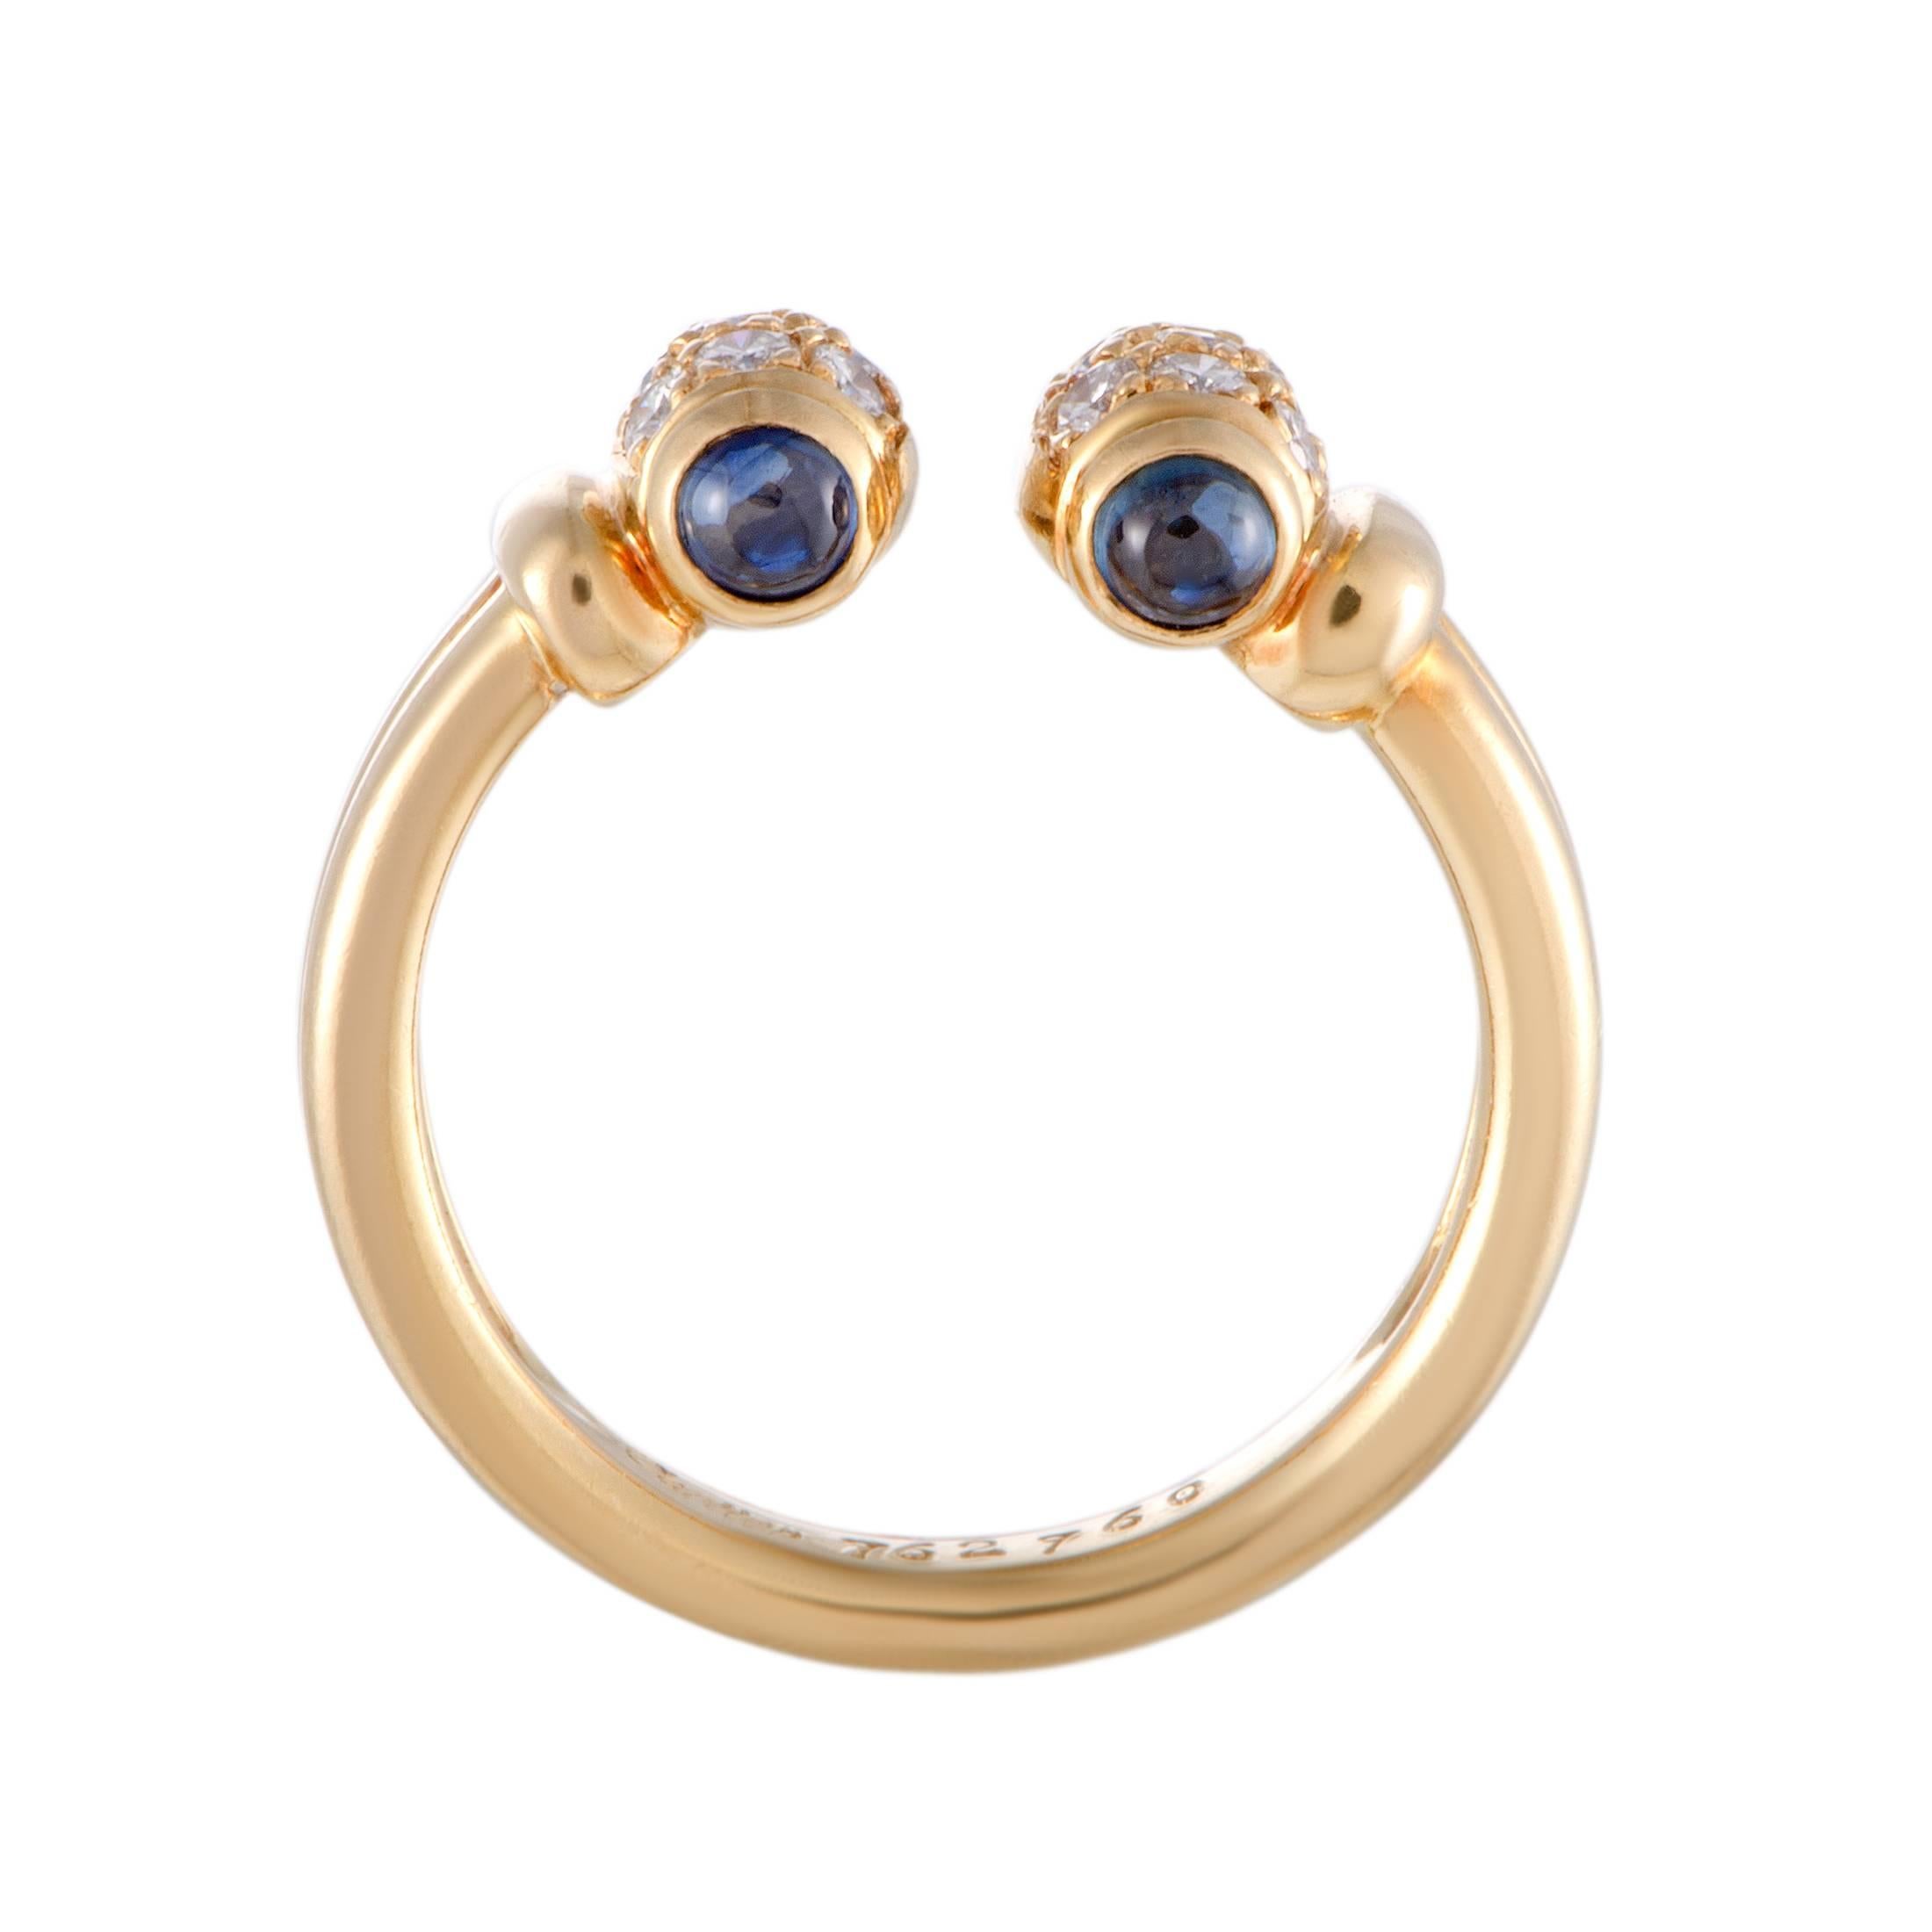 Created by Cartier for the exquisite “Ellipse” collection, this beautiful ring features an exceptionally classy design that is topped off with luxurious blend of attractive gems. The ring is made of 18K yellow gold and expertly set with regal